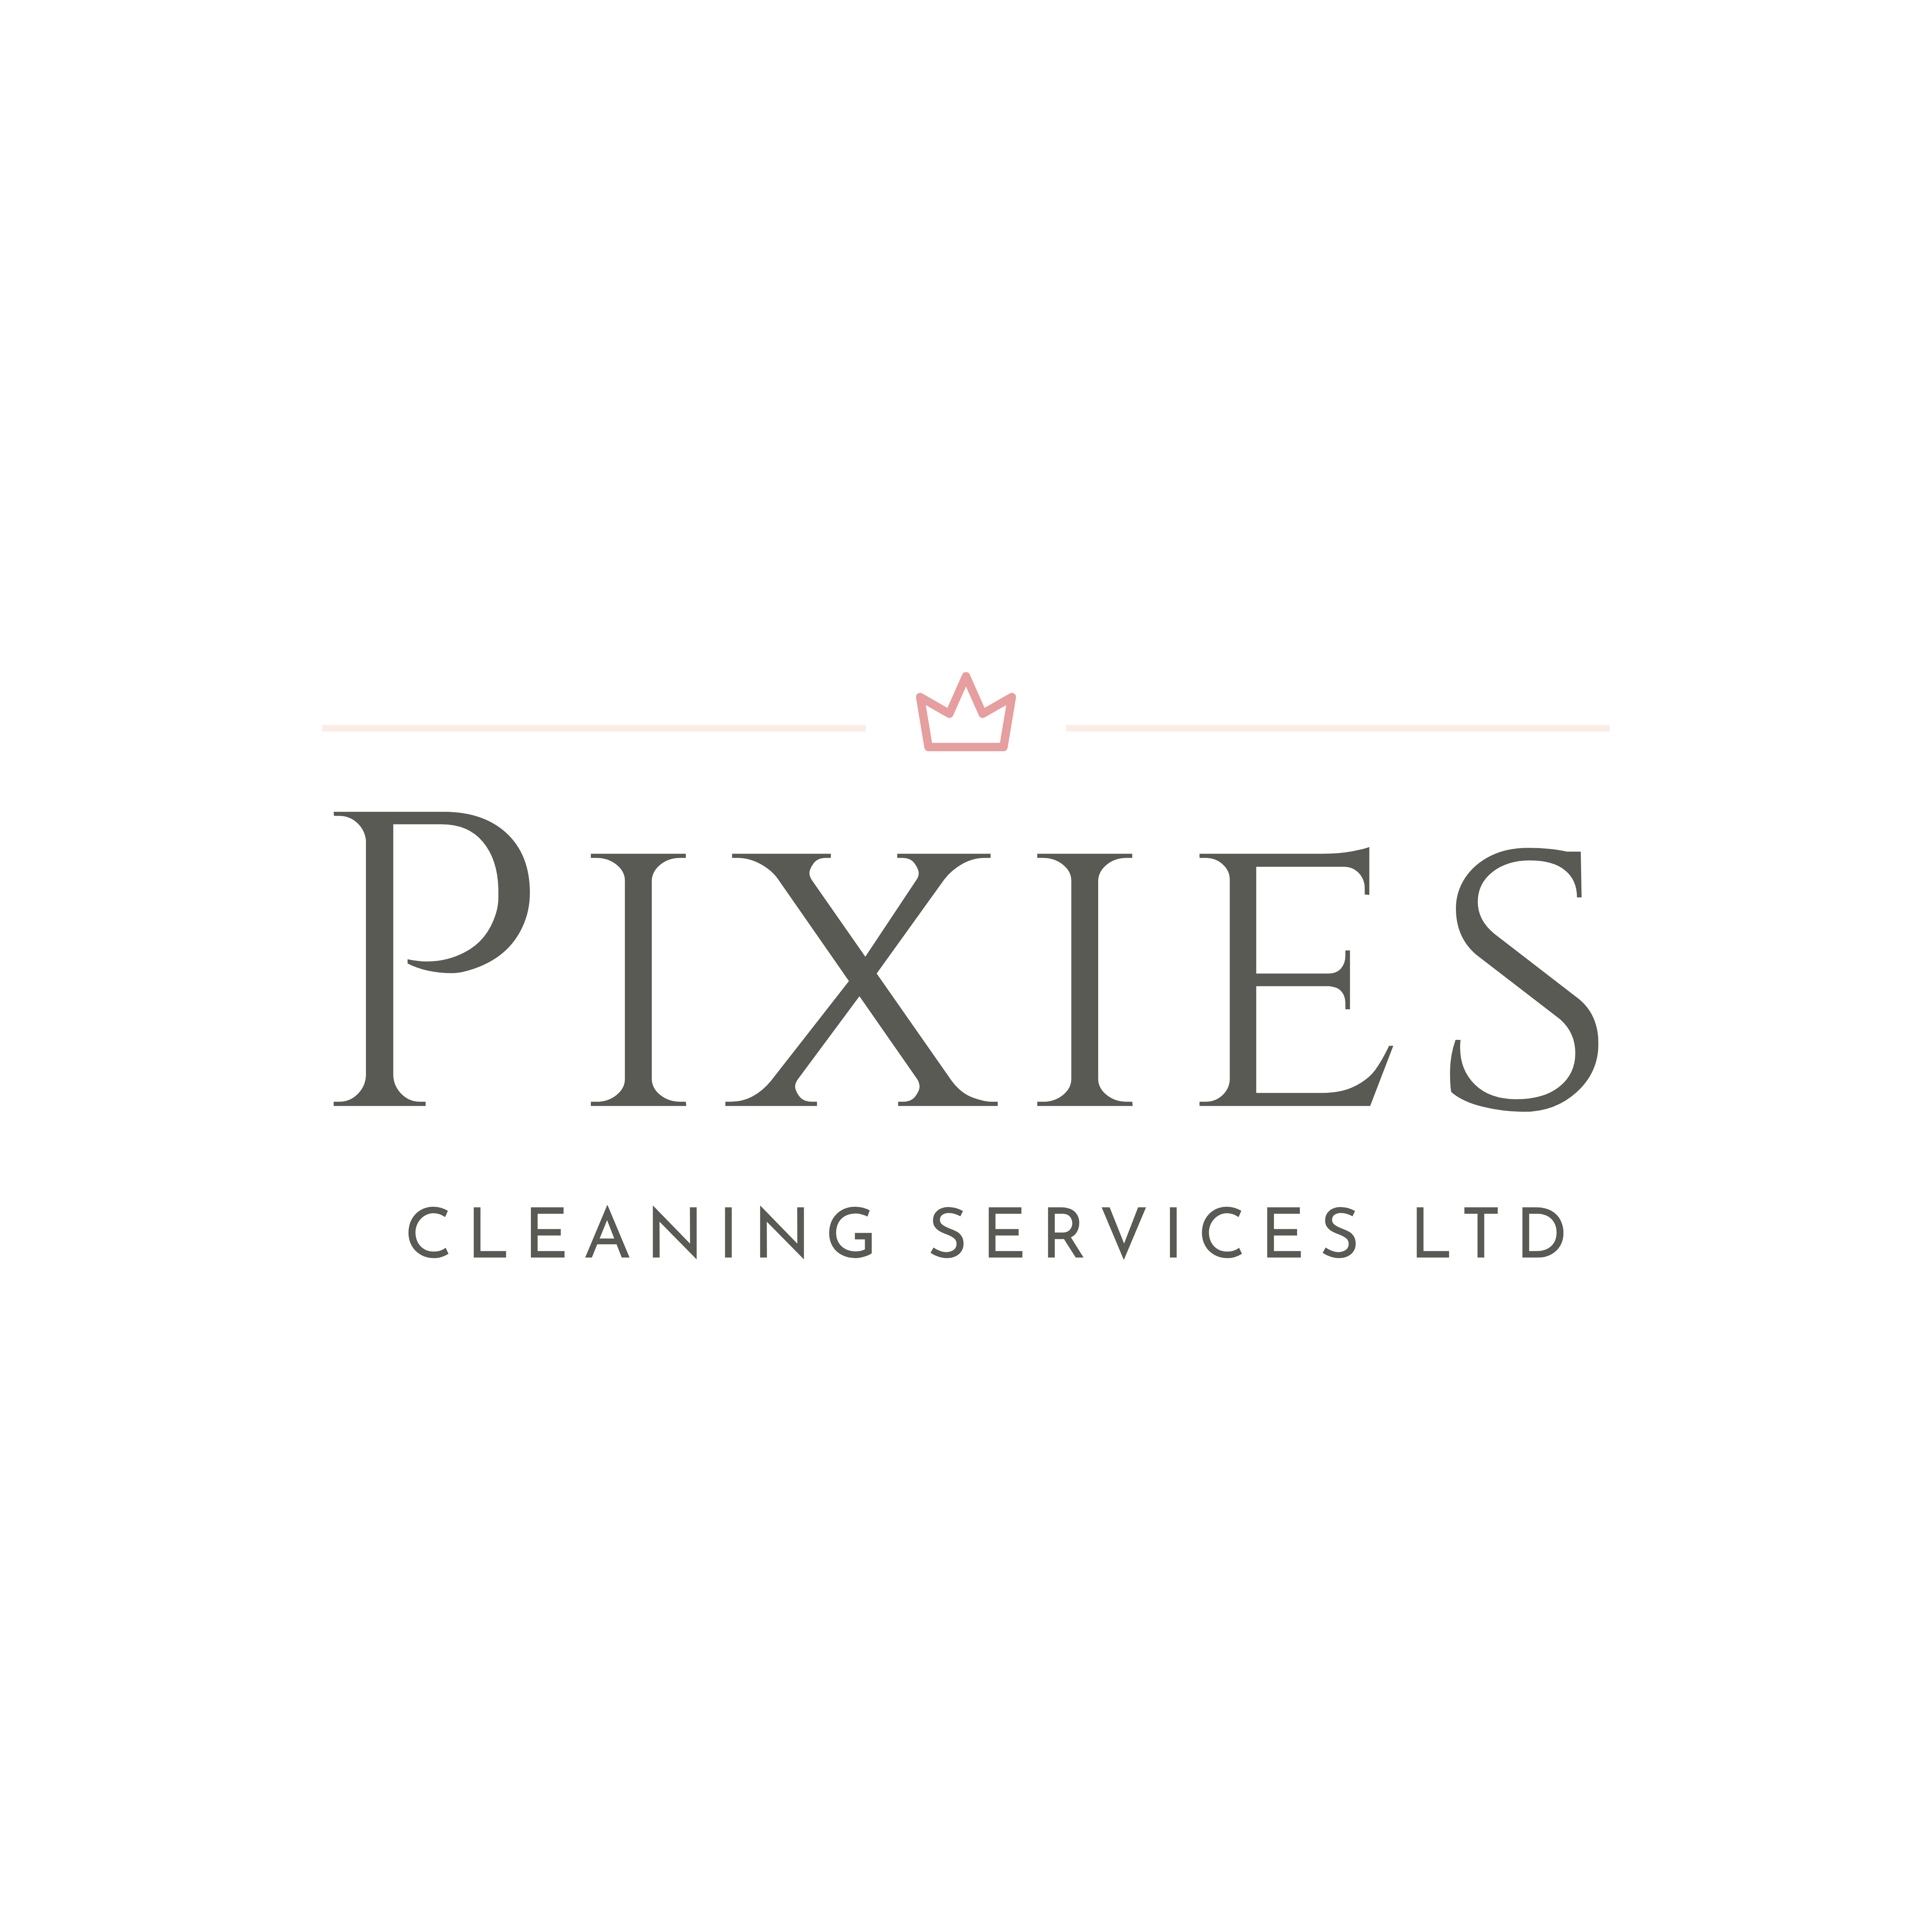 Logo of Pixies Cleaning Services